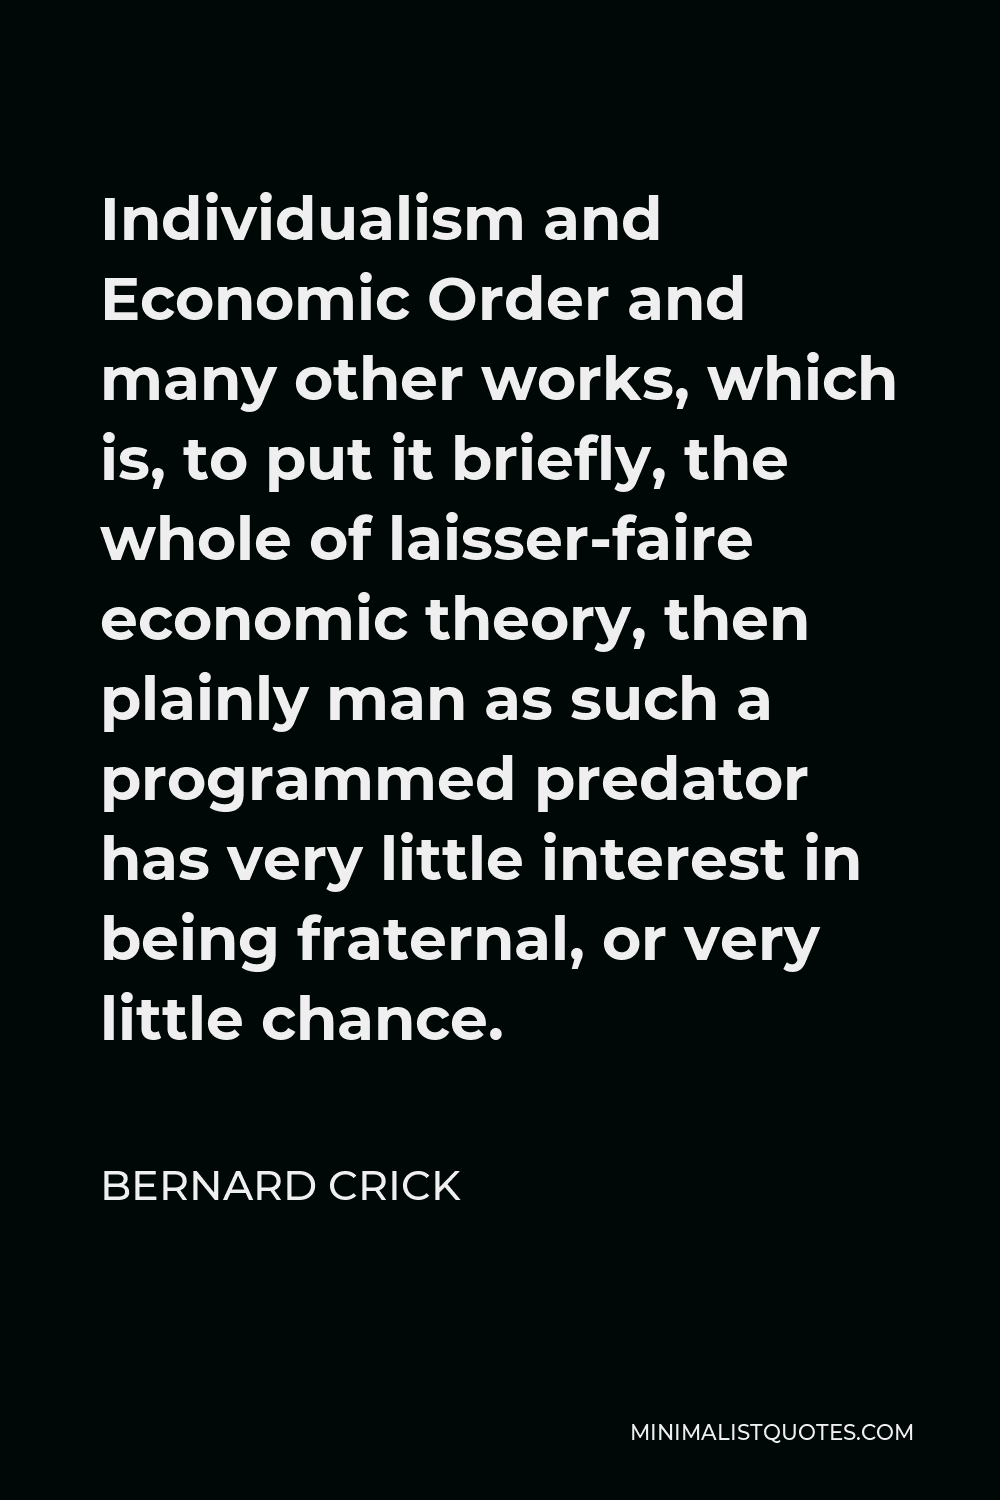 Bernard Crick Quote - Individualism and Economic Order and many other works, which is, to put it briefly, the whole of laisser-faire economic theory, then plainly man as such a programmed predator has very little interest in being fraternal, or very little chance.